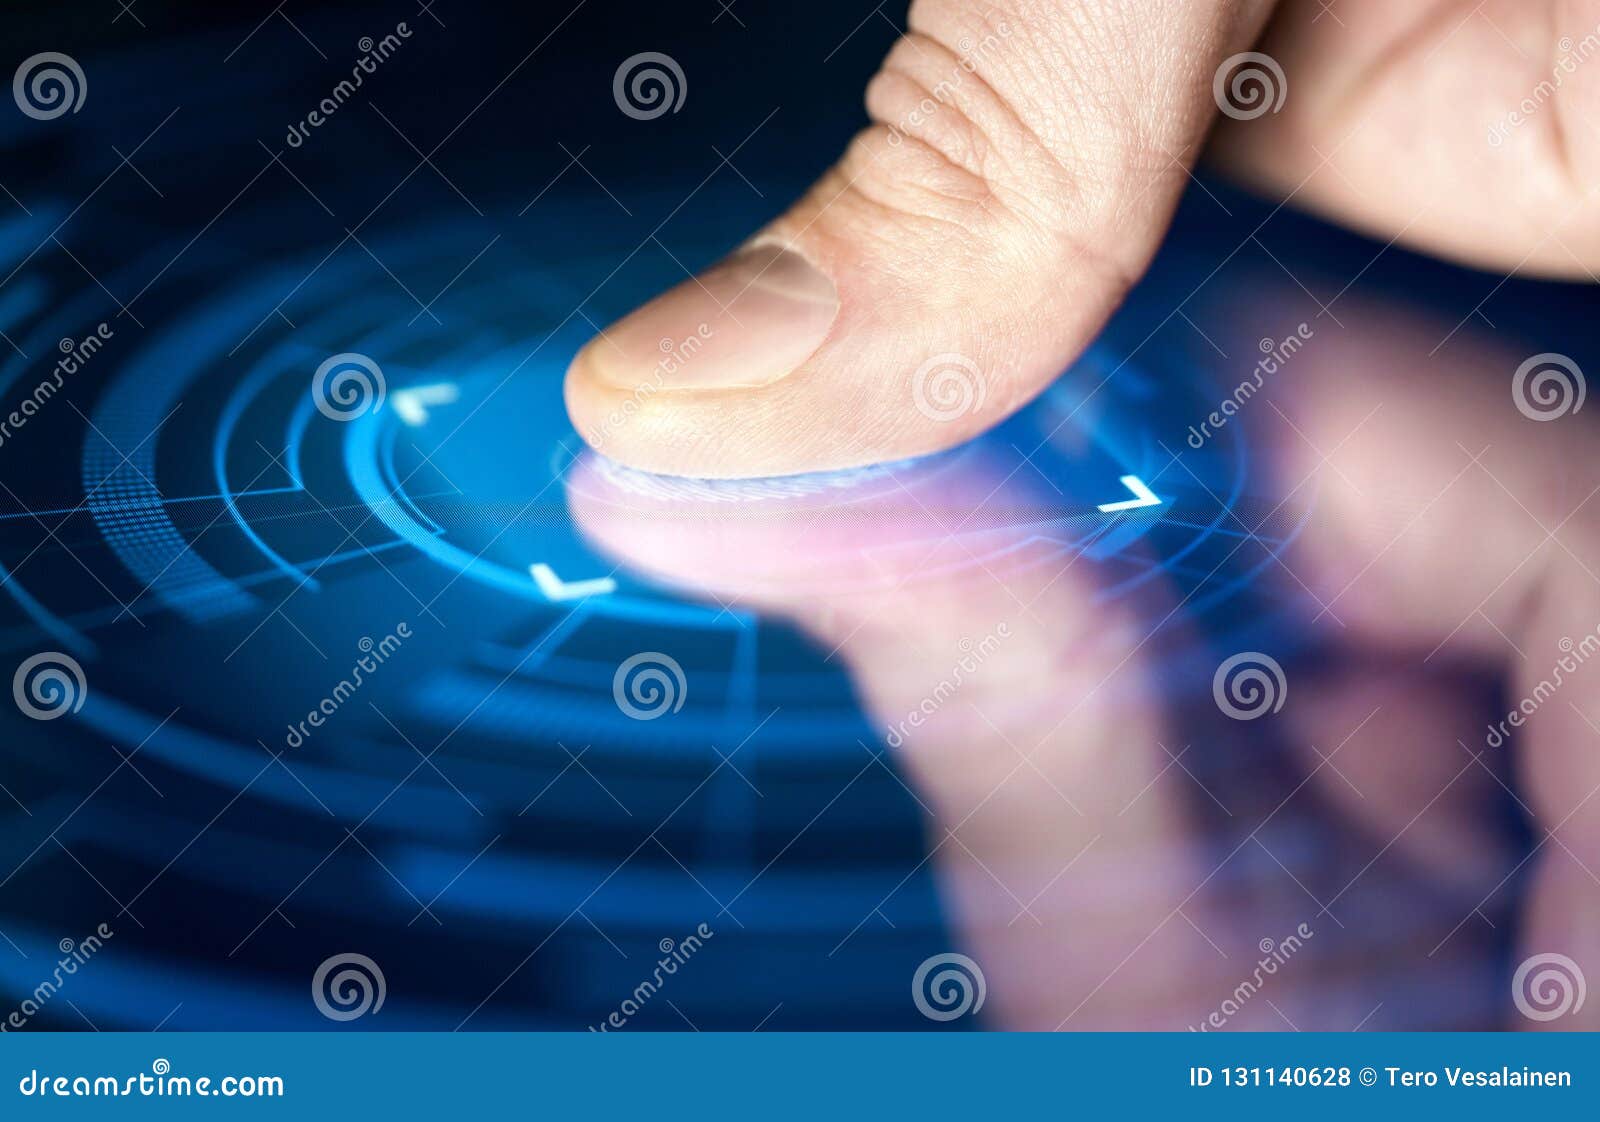 fingerprint recognition technology for digital biometric cyber security and identification.